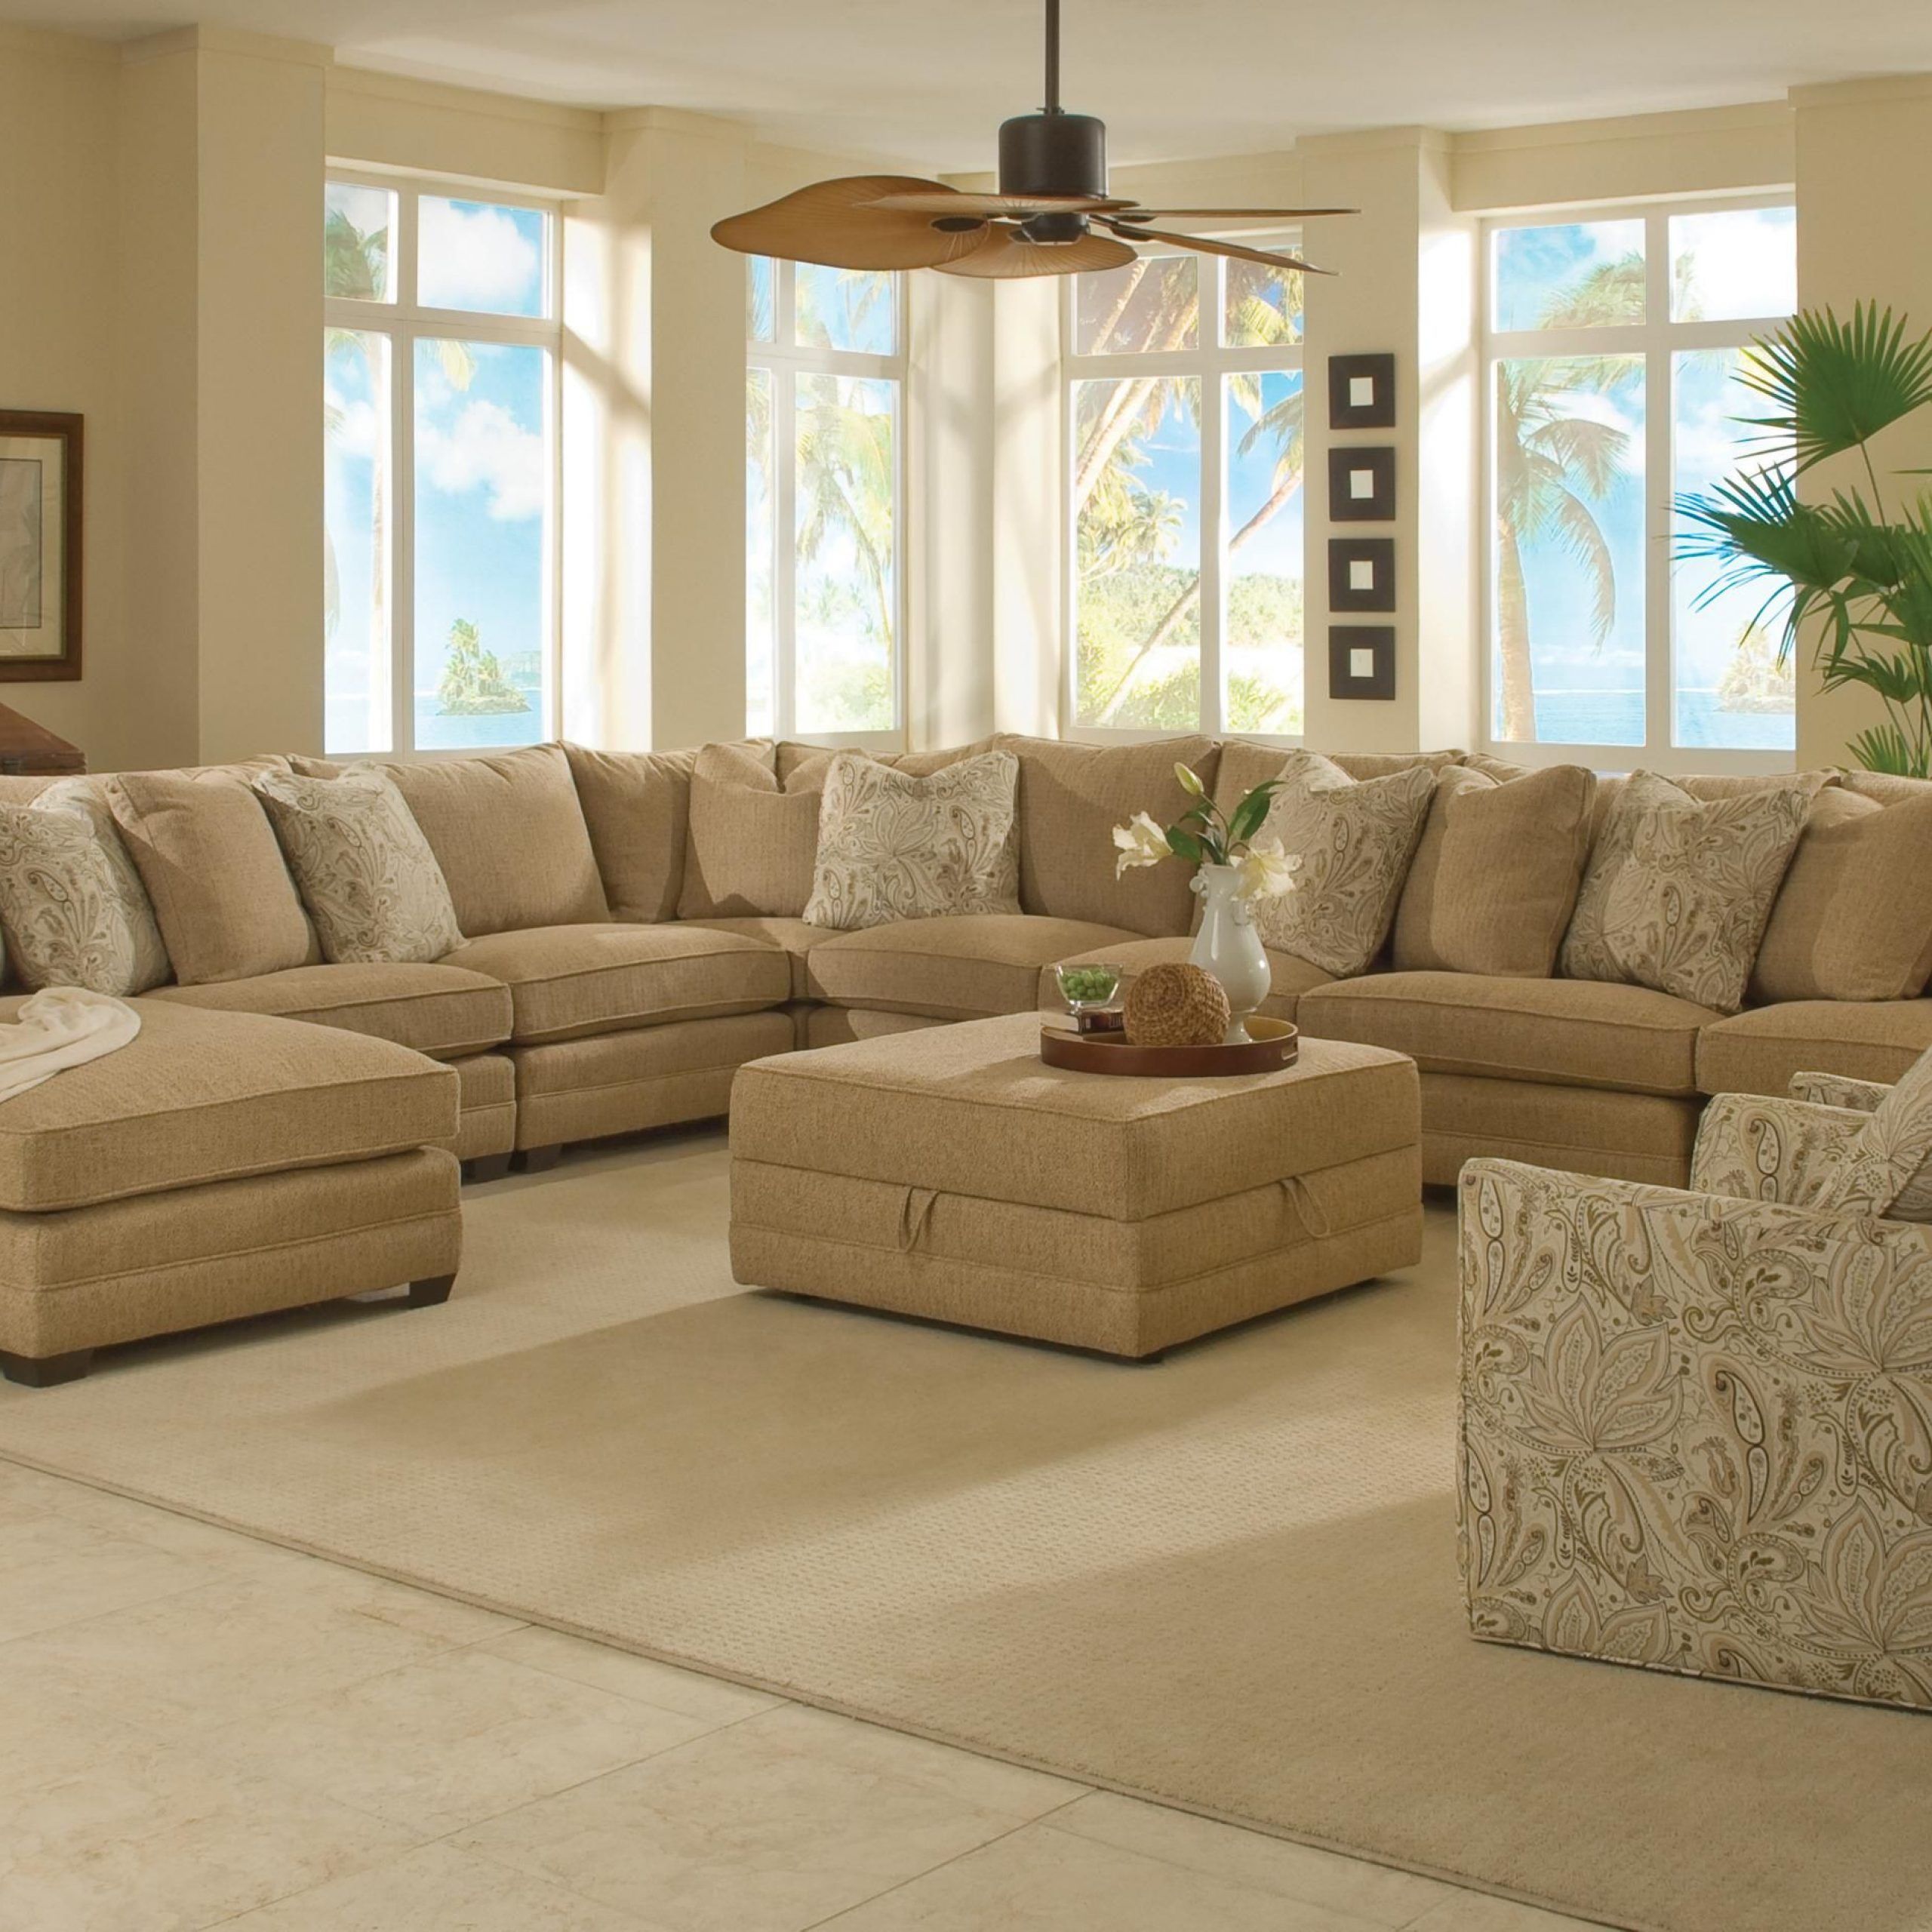 Plush Sectional Sofas – The Arts With 2pc Luxurious And Plush Corduroy Sectional Sofas Brown (View 3 of 15)